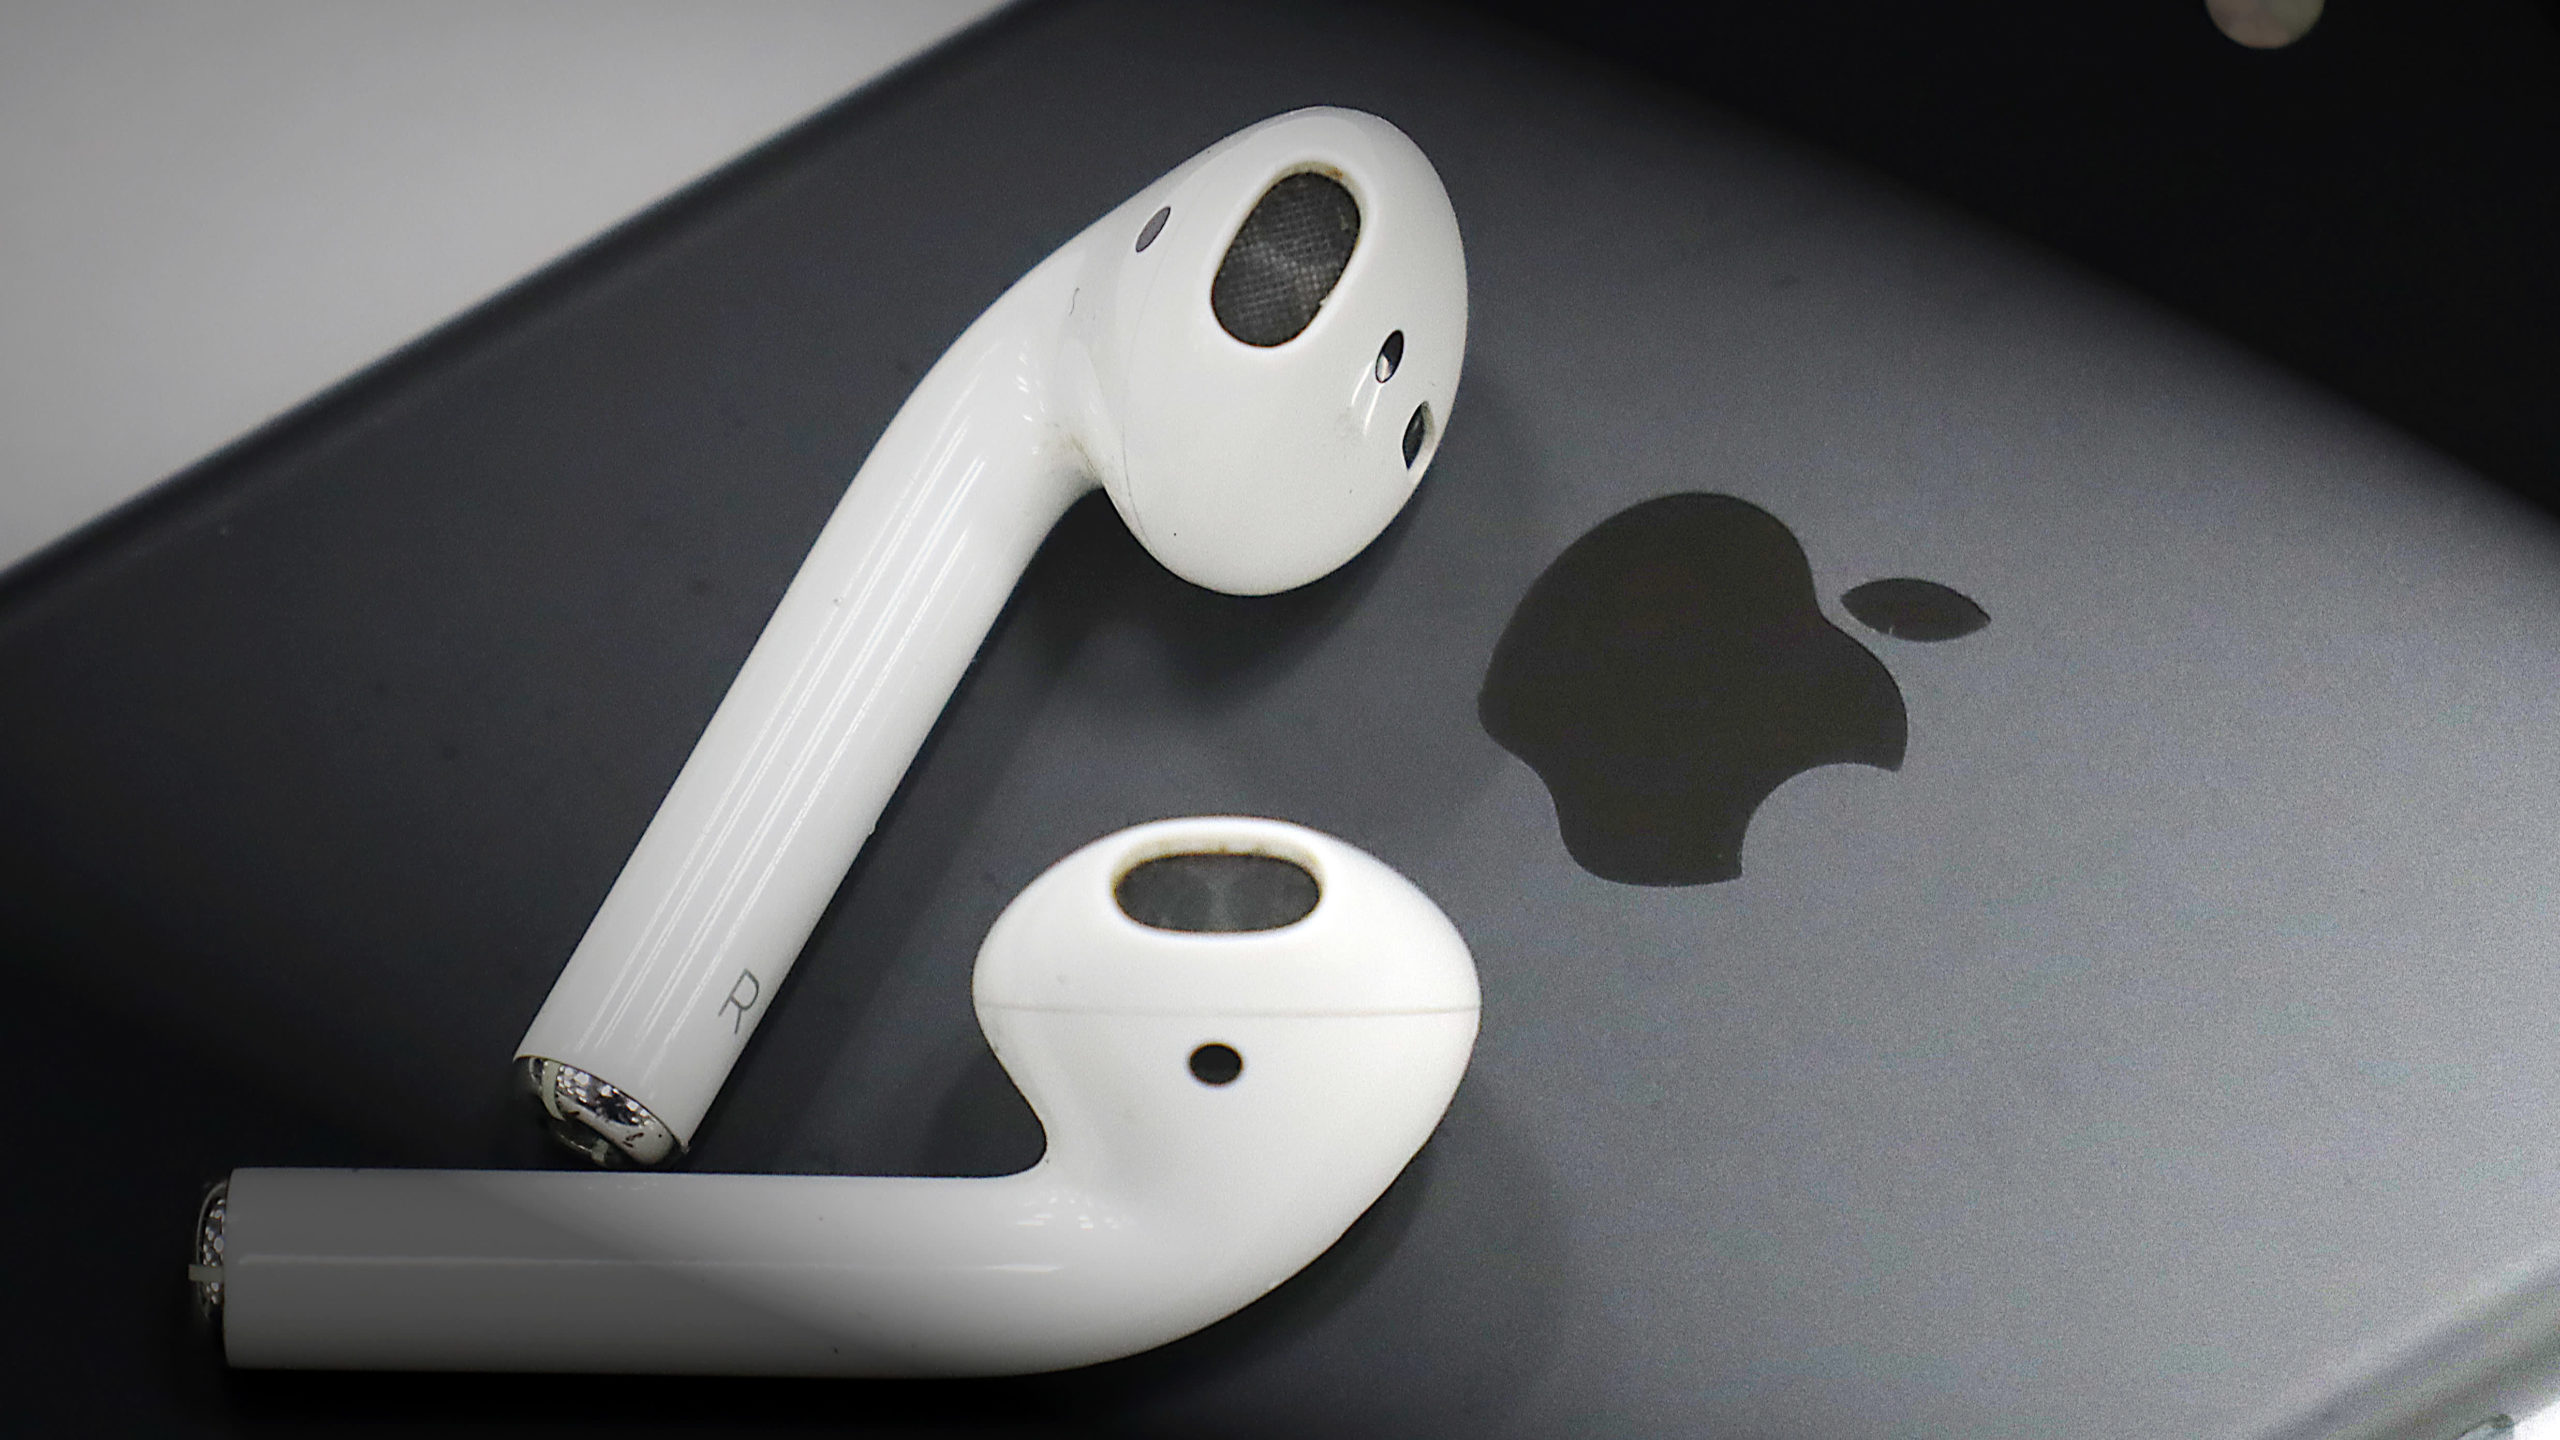 Apple AirPods Pro Update Latest Firmware Patch not Good for Noise cancellation, here is how to Upgrade